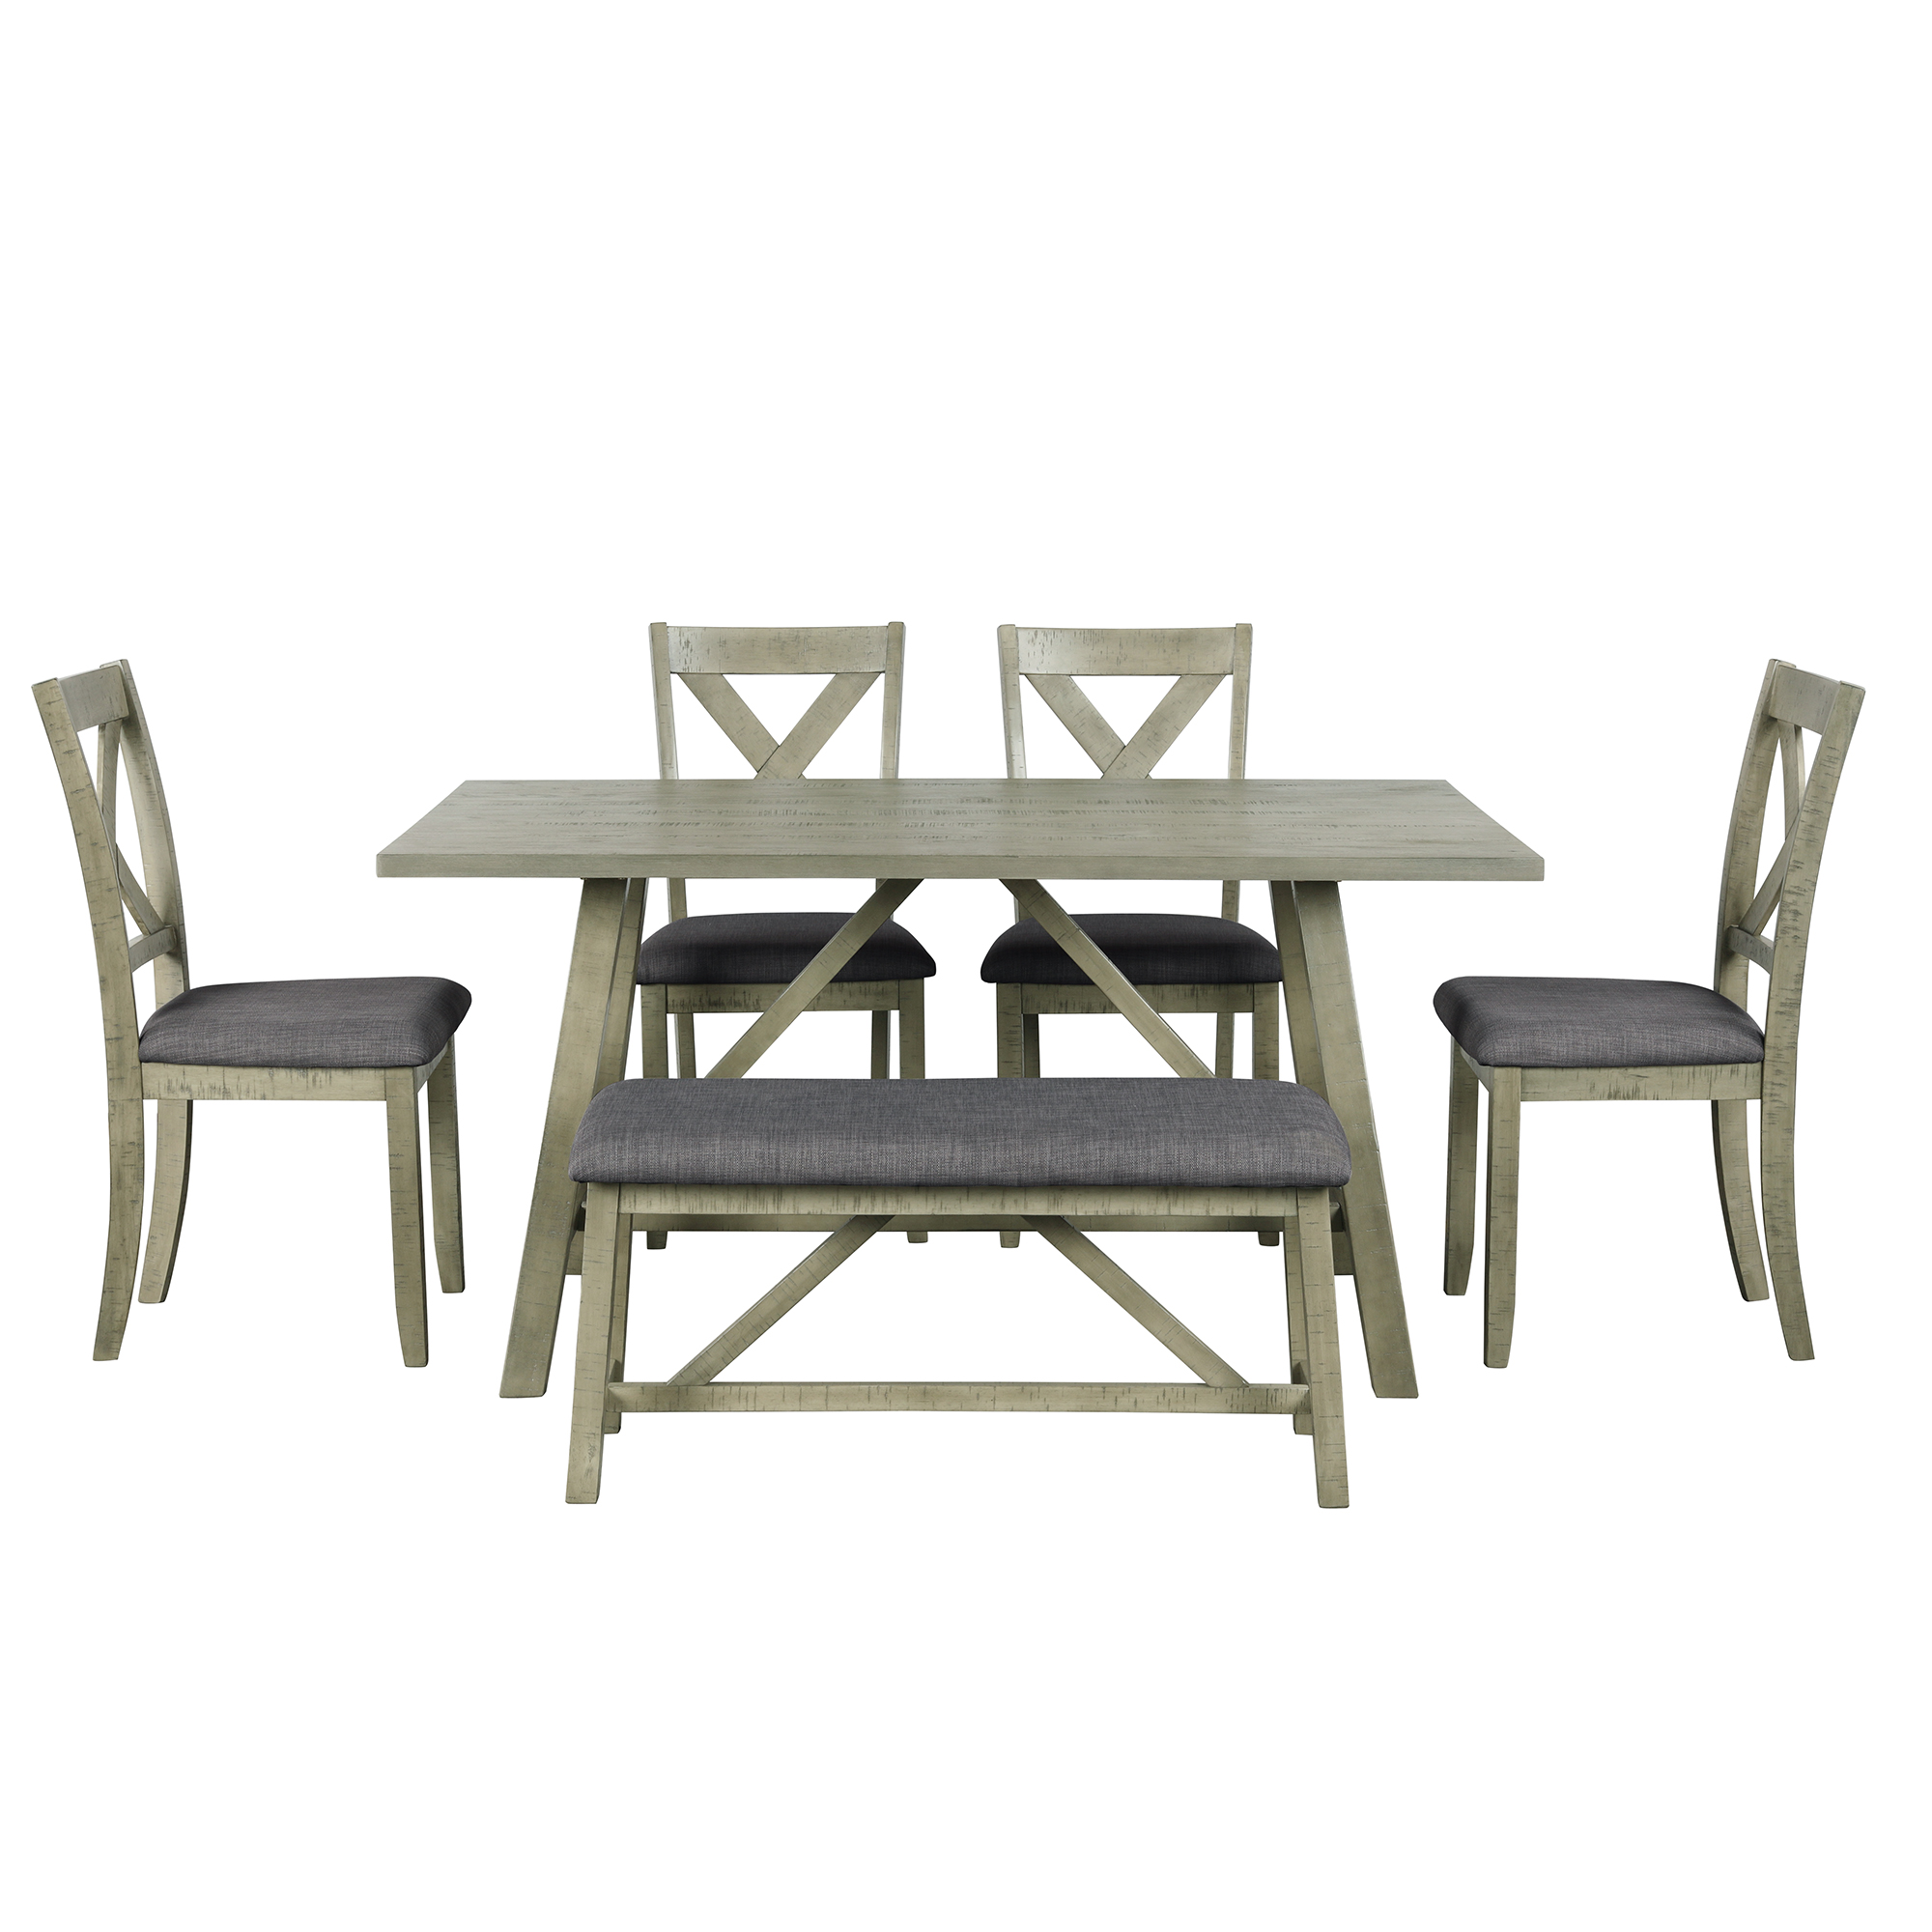 6 Piece Dining Table Set Wood Dining Table and chair Kitchen Table Set with Table, Bench and 4 Chairs, Rustic Style, Gray(No Difference with SH000109AAE）-CASAINC